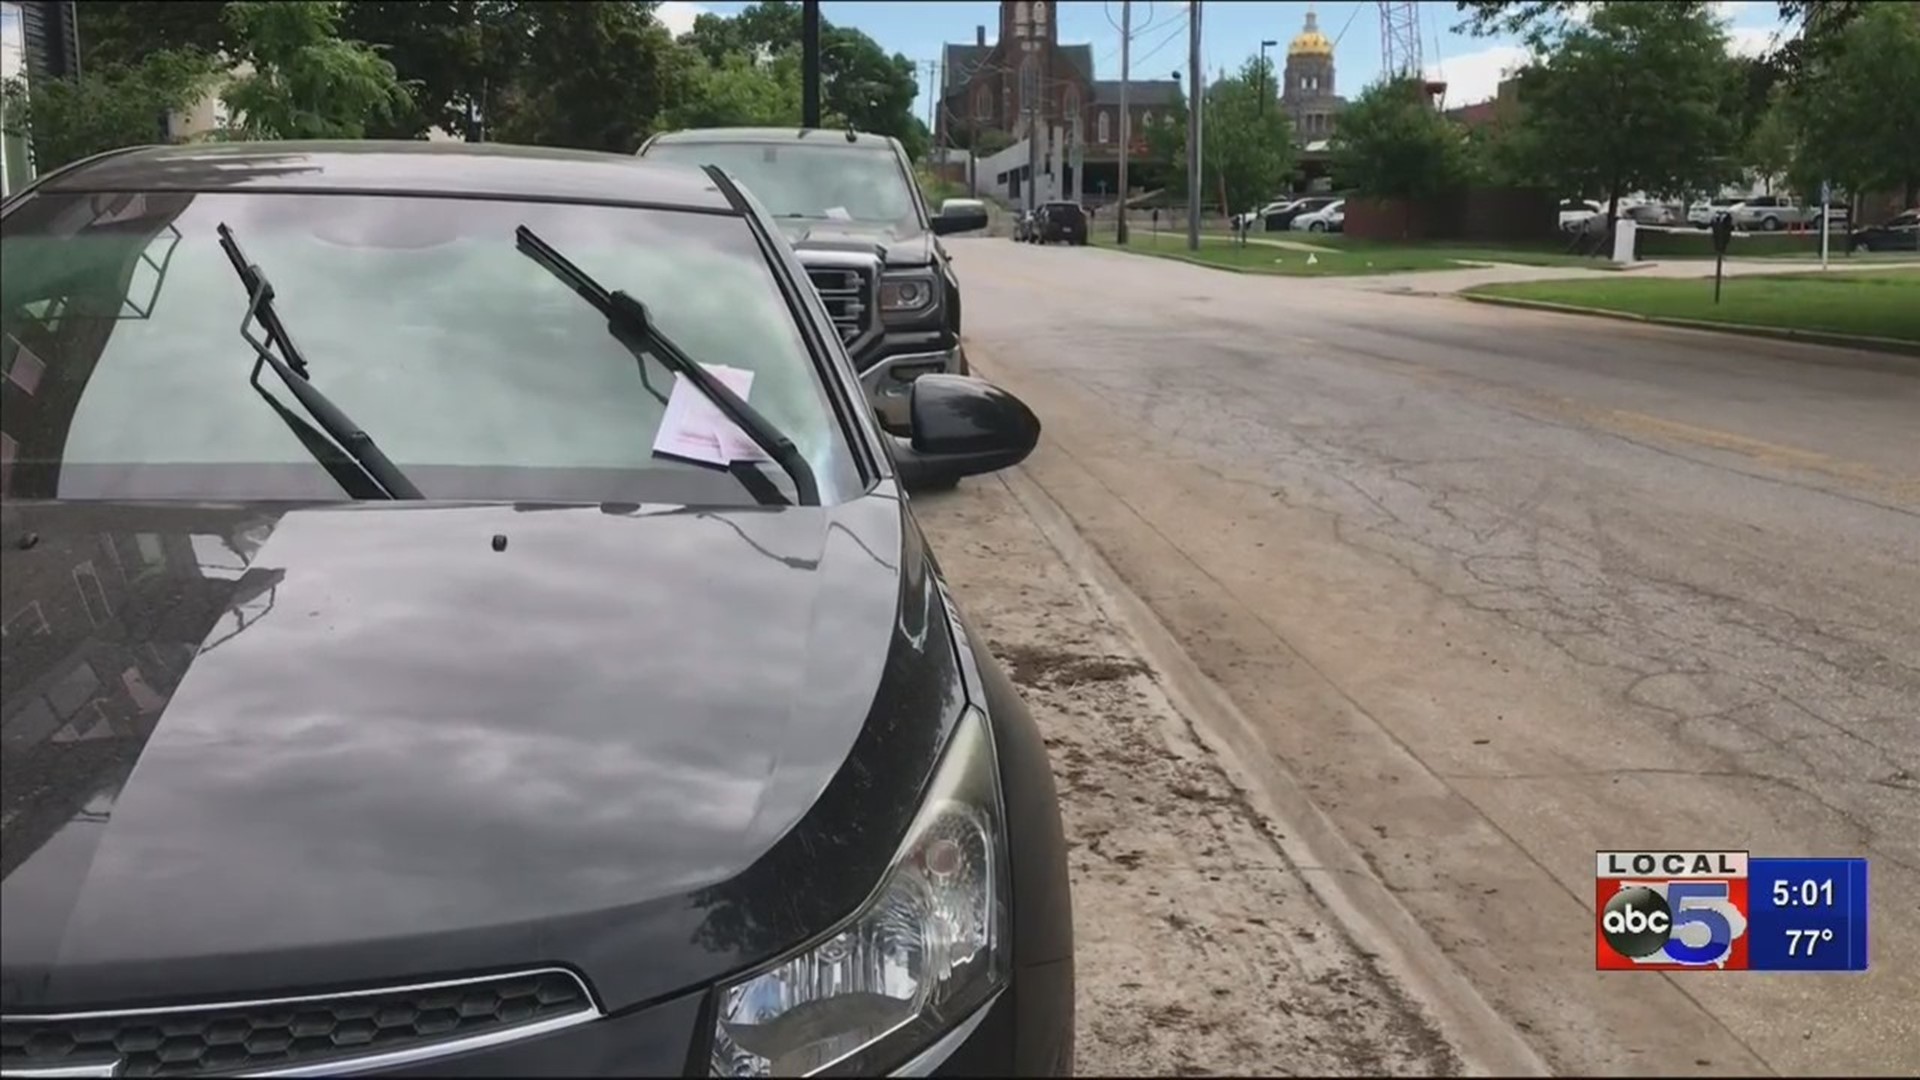 Flash flooding wreaks havoc on parked cars over the weekend